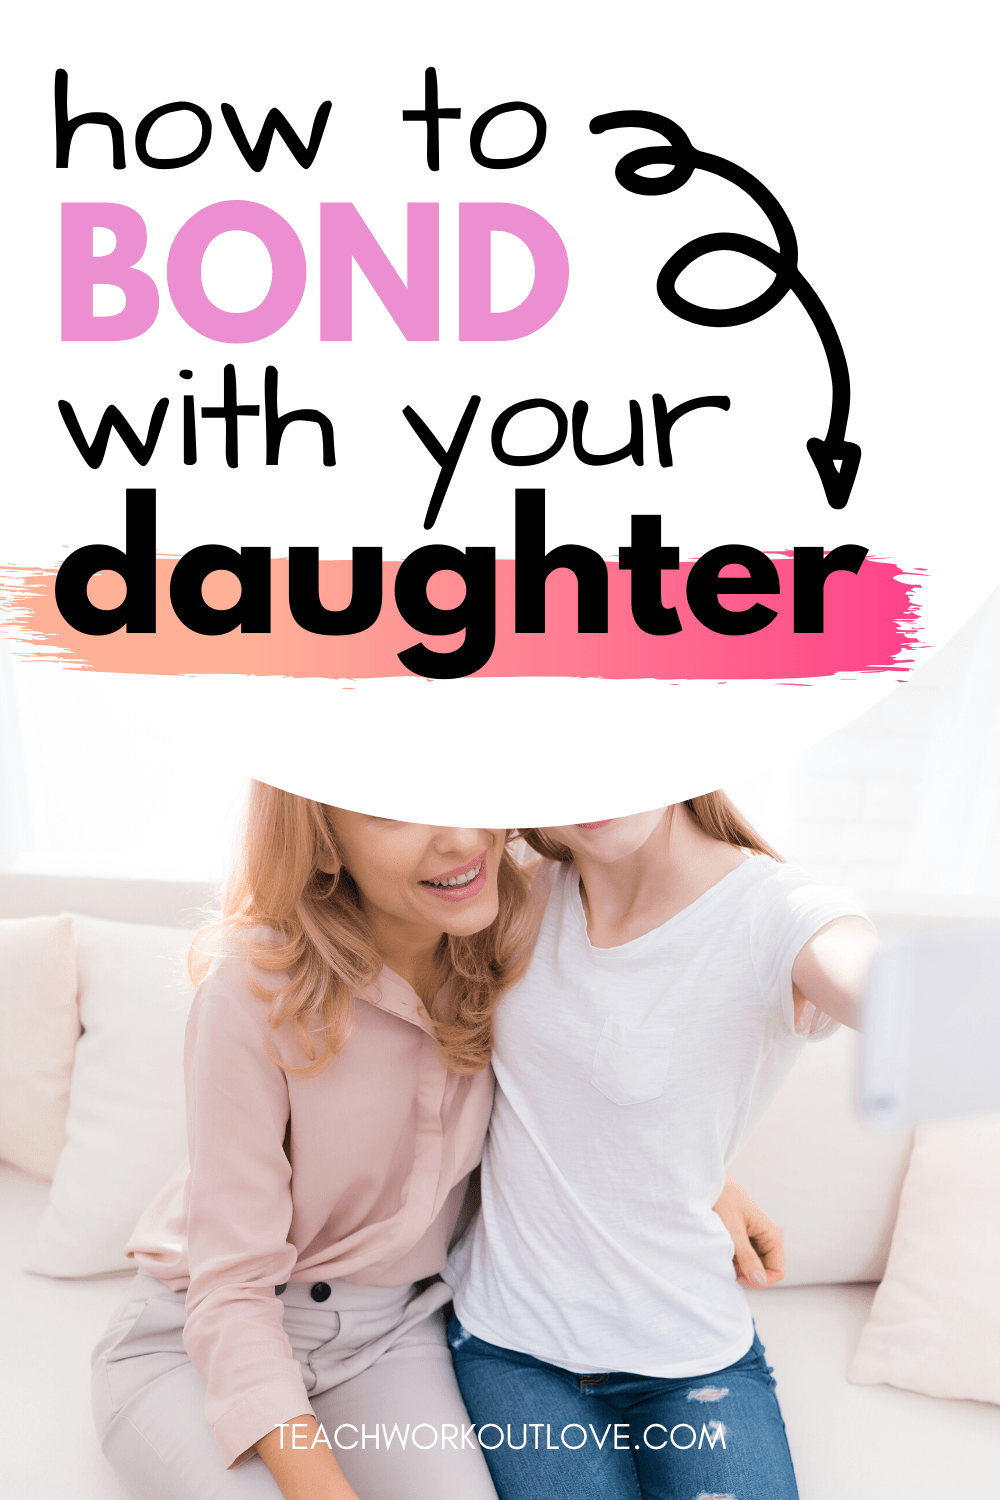 Teens are notoriously difficult to talk to. They seem to know everything. Here are 5 ways to bond with your distant teenager successfully!